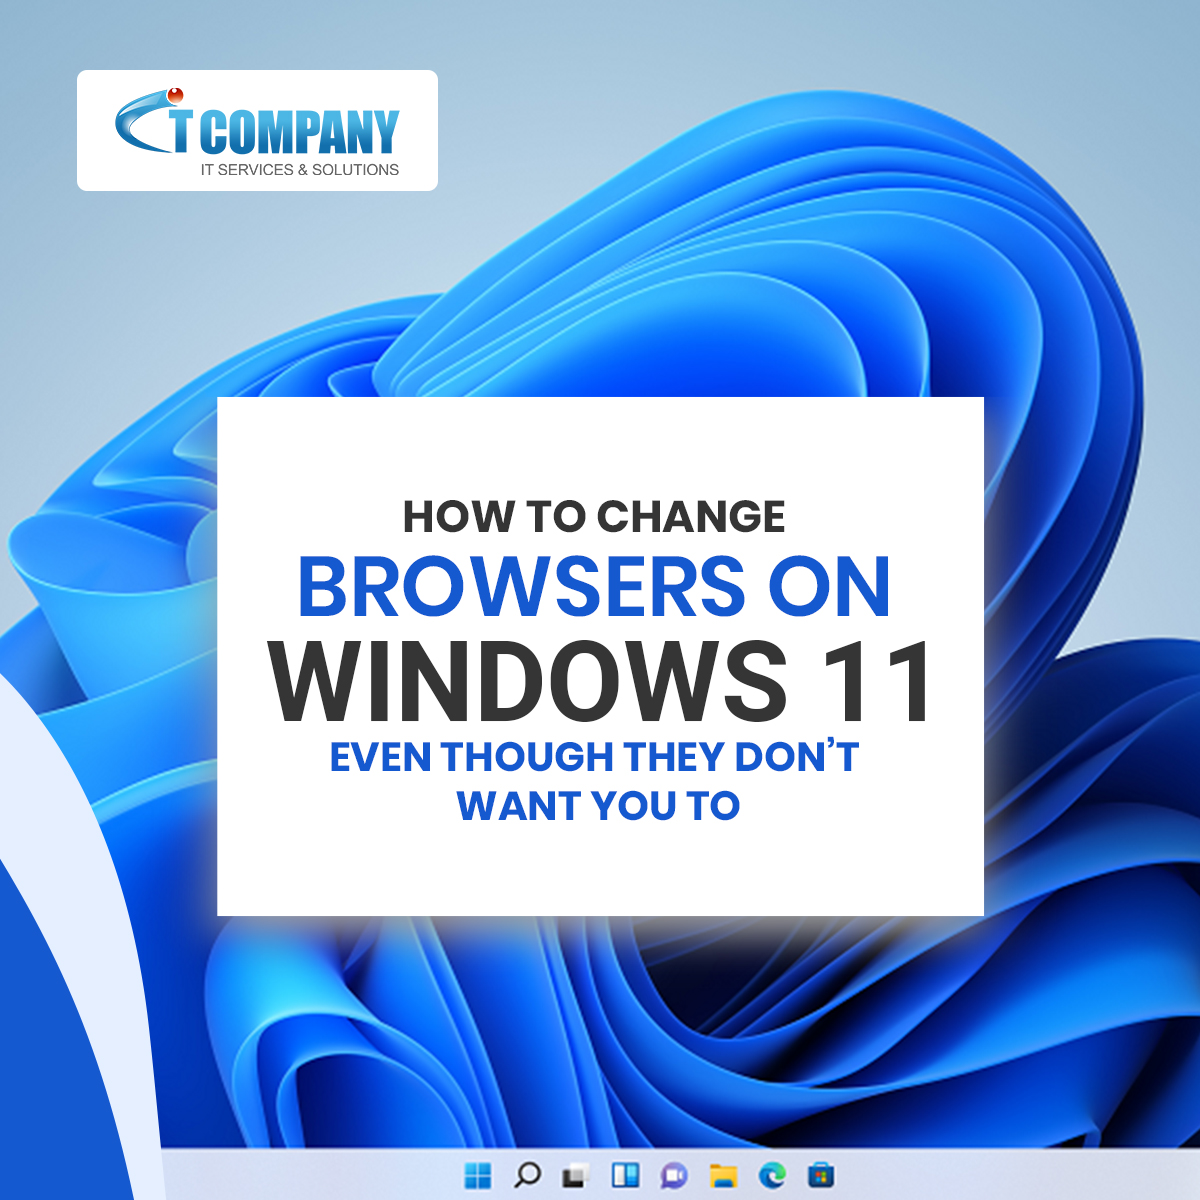 Even if they don’t want you to, here’s how to change browsers on Windows 11